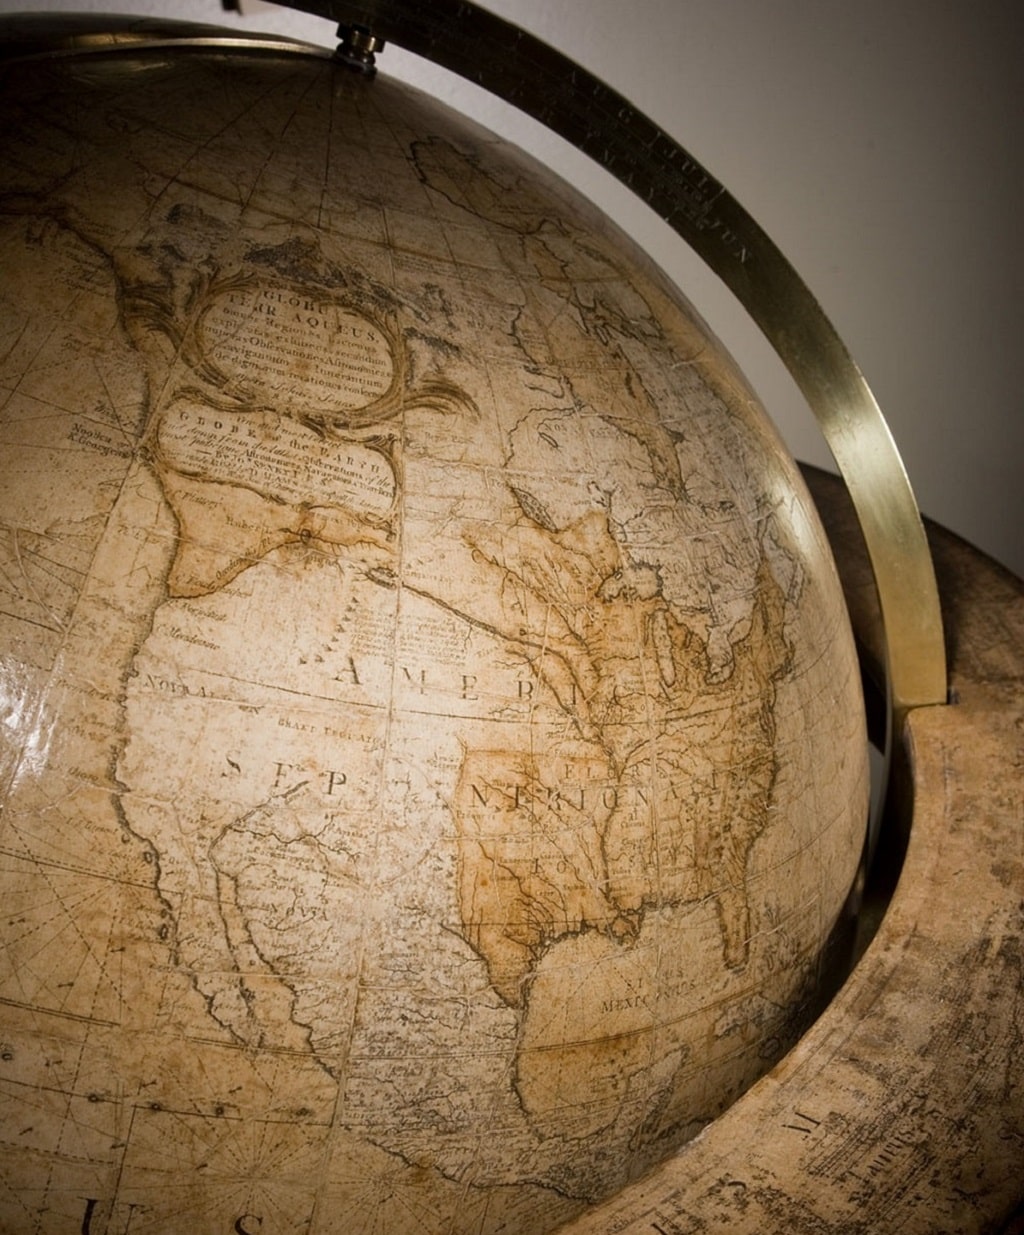 Washington’s Globe Detail of North America with views of Mexico, United States, and Canada-min-min